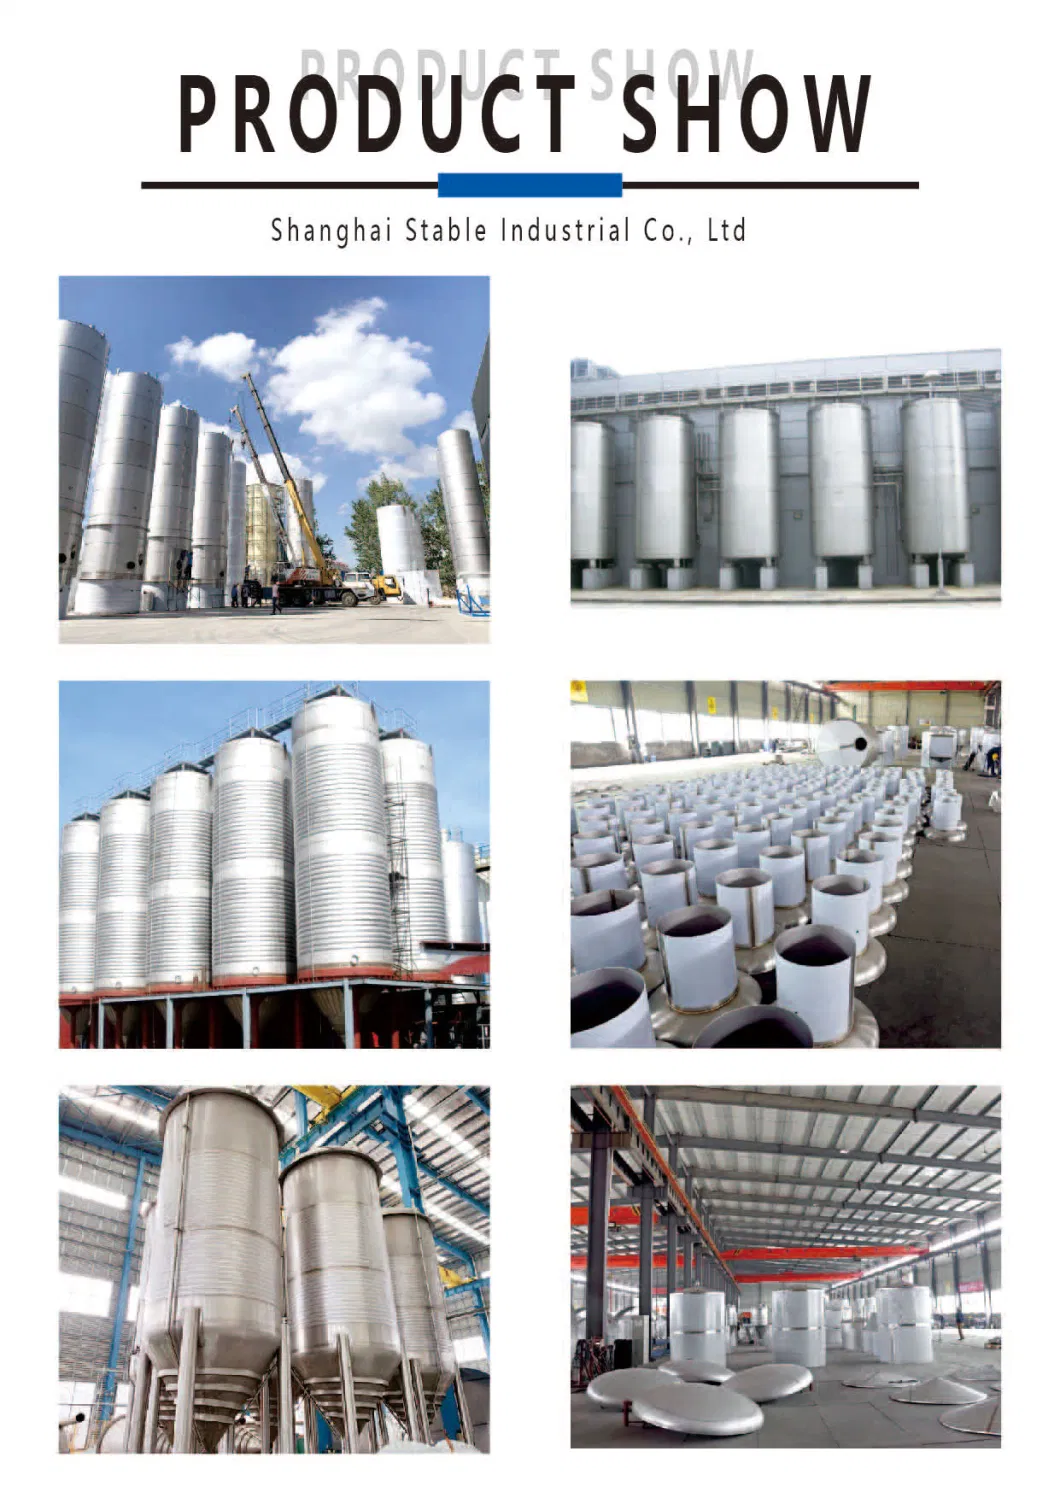 Stainless Steel Storage Vessels for Dairy/Beverage/Sauce Process